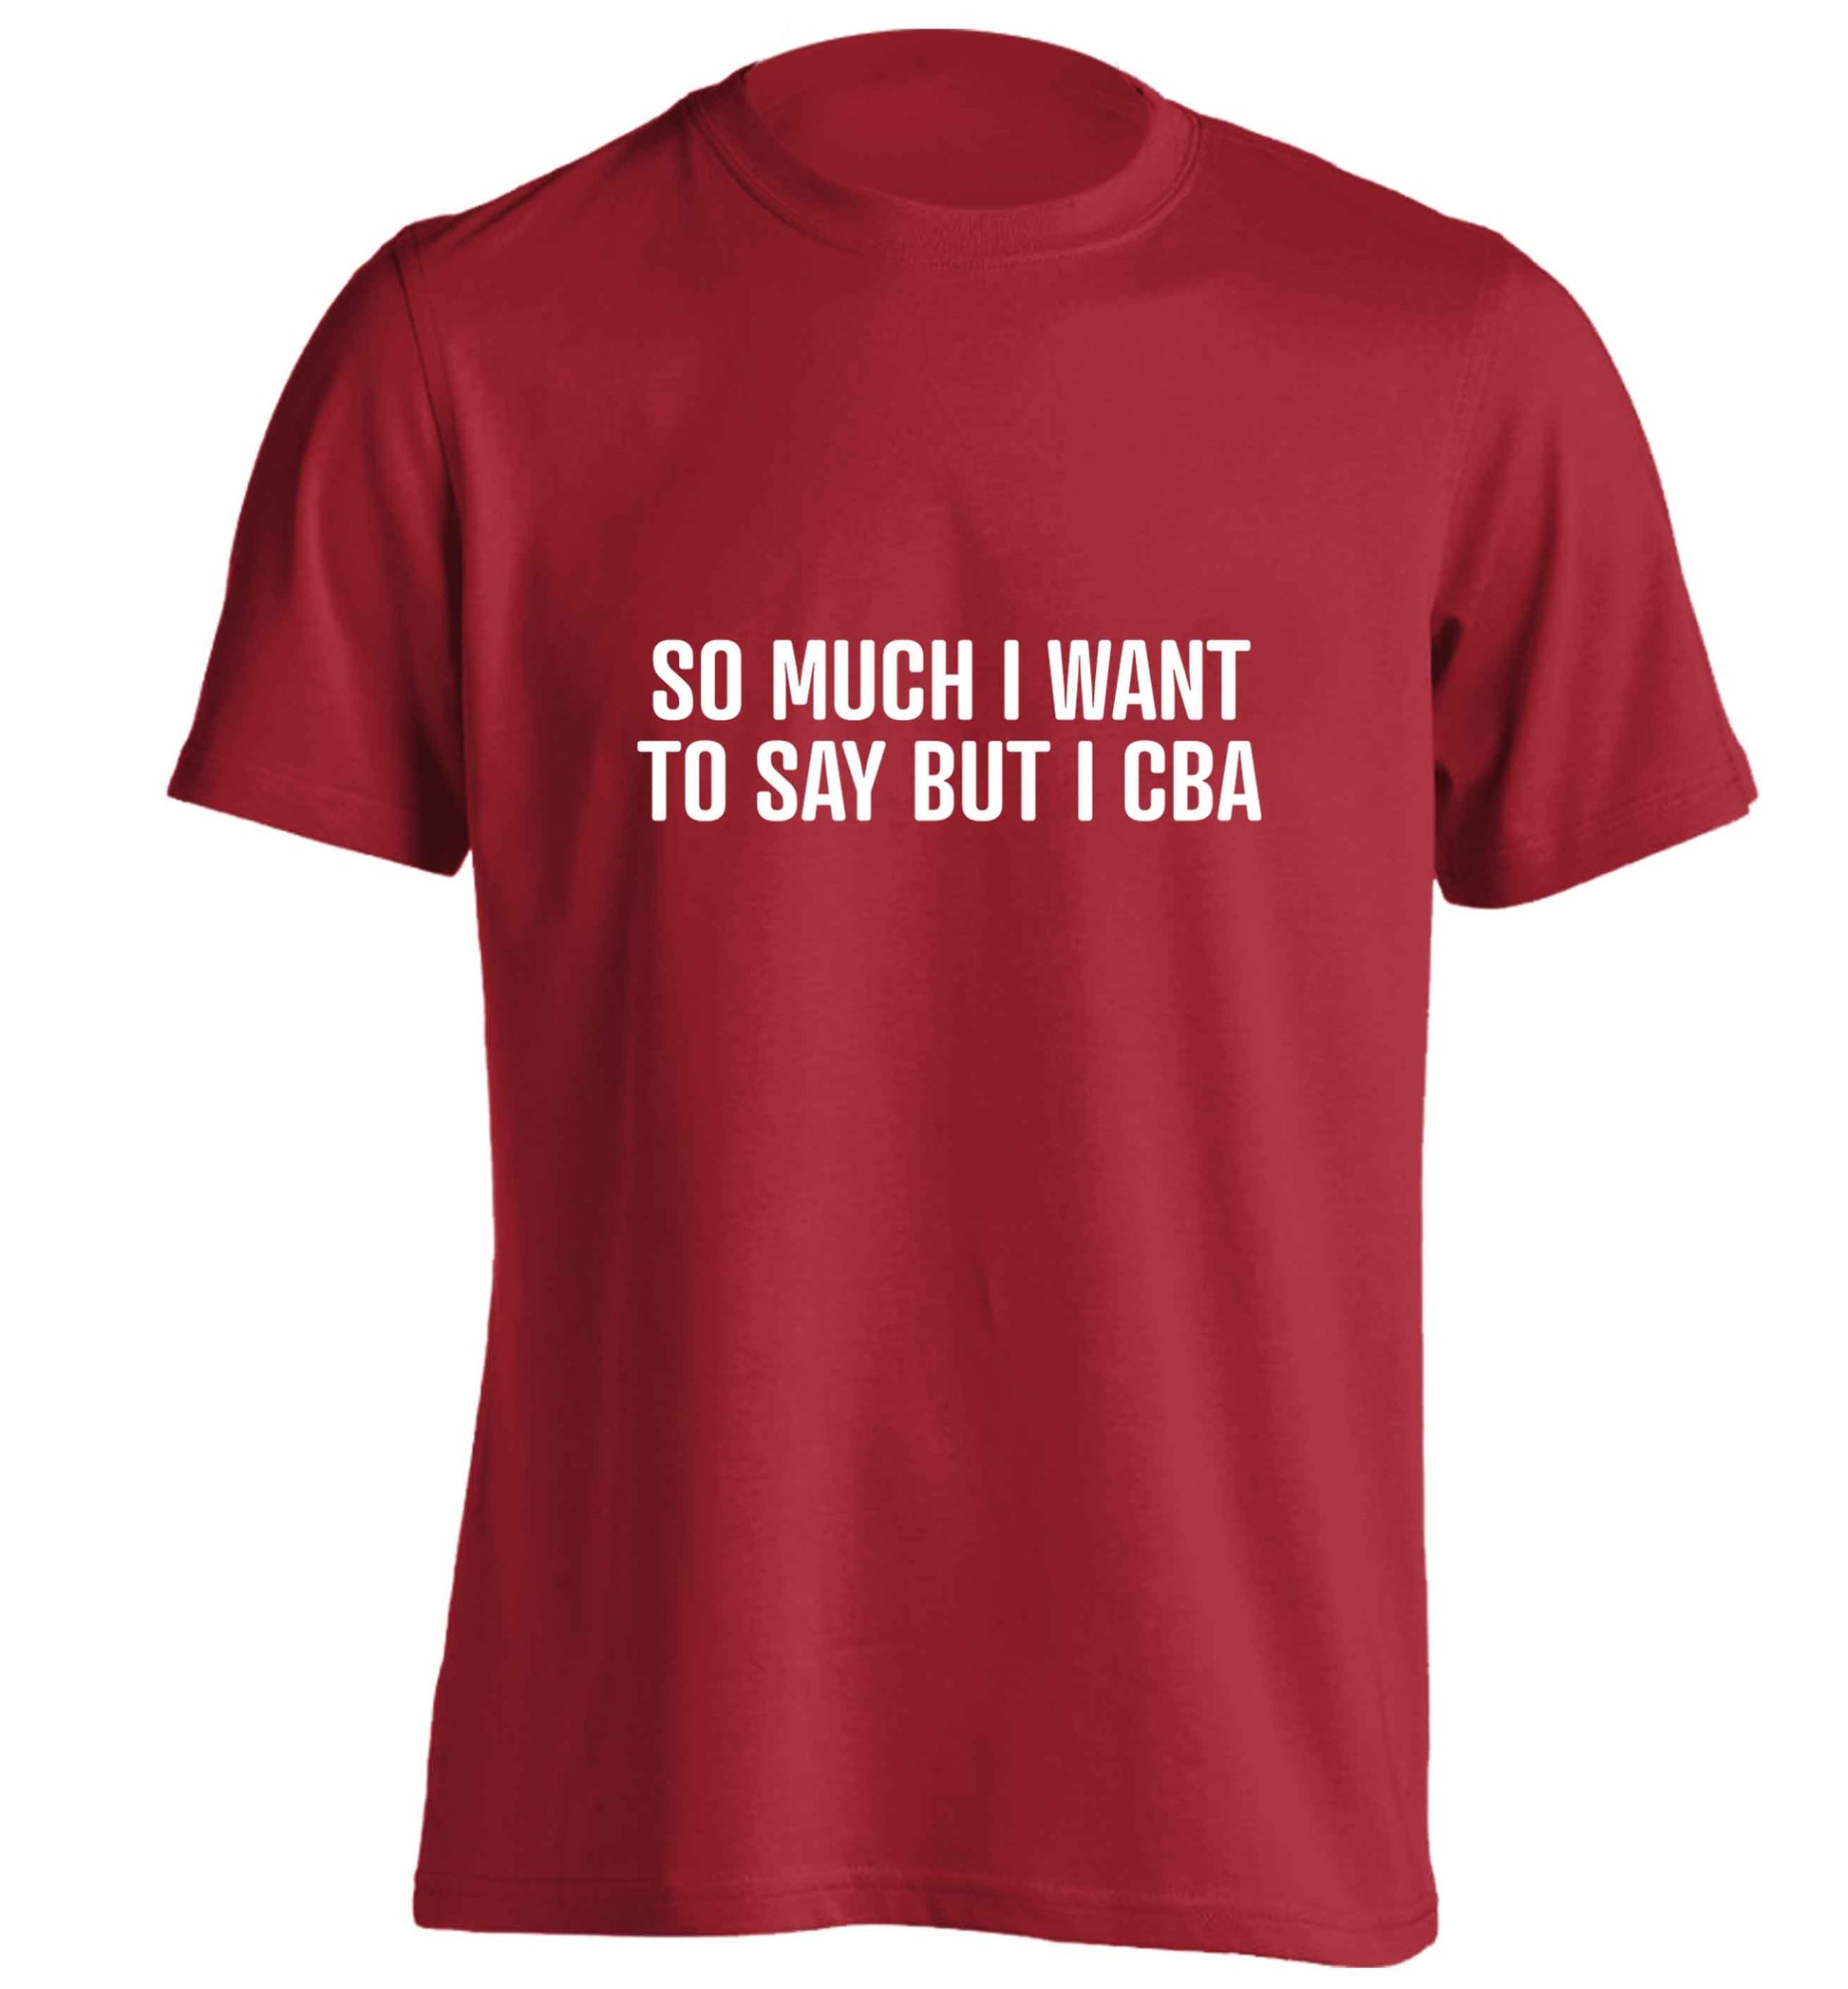 So much I want to say I cba  adults unisex red Tshirt 2XL